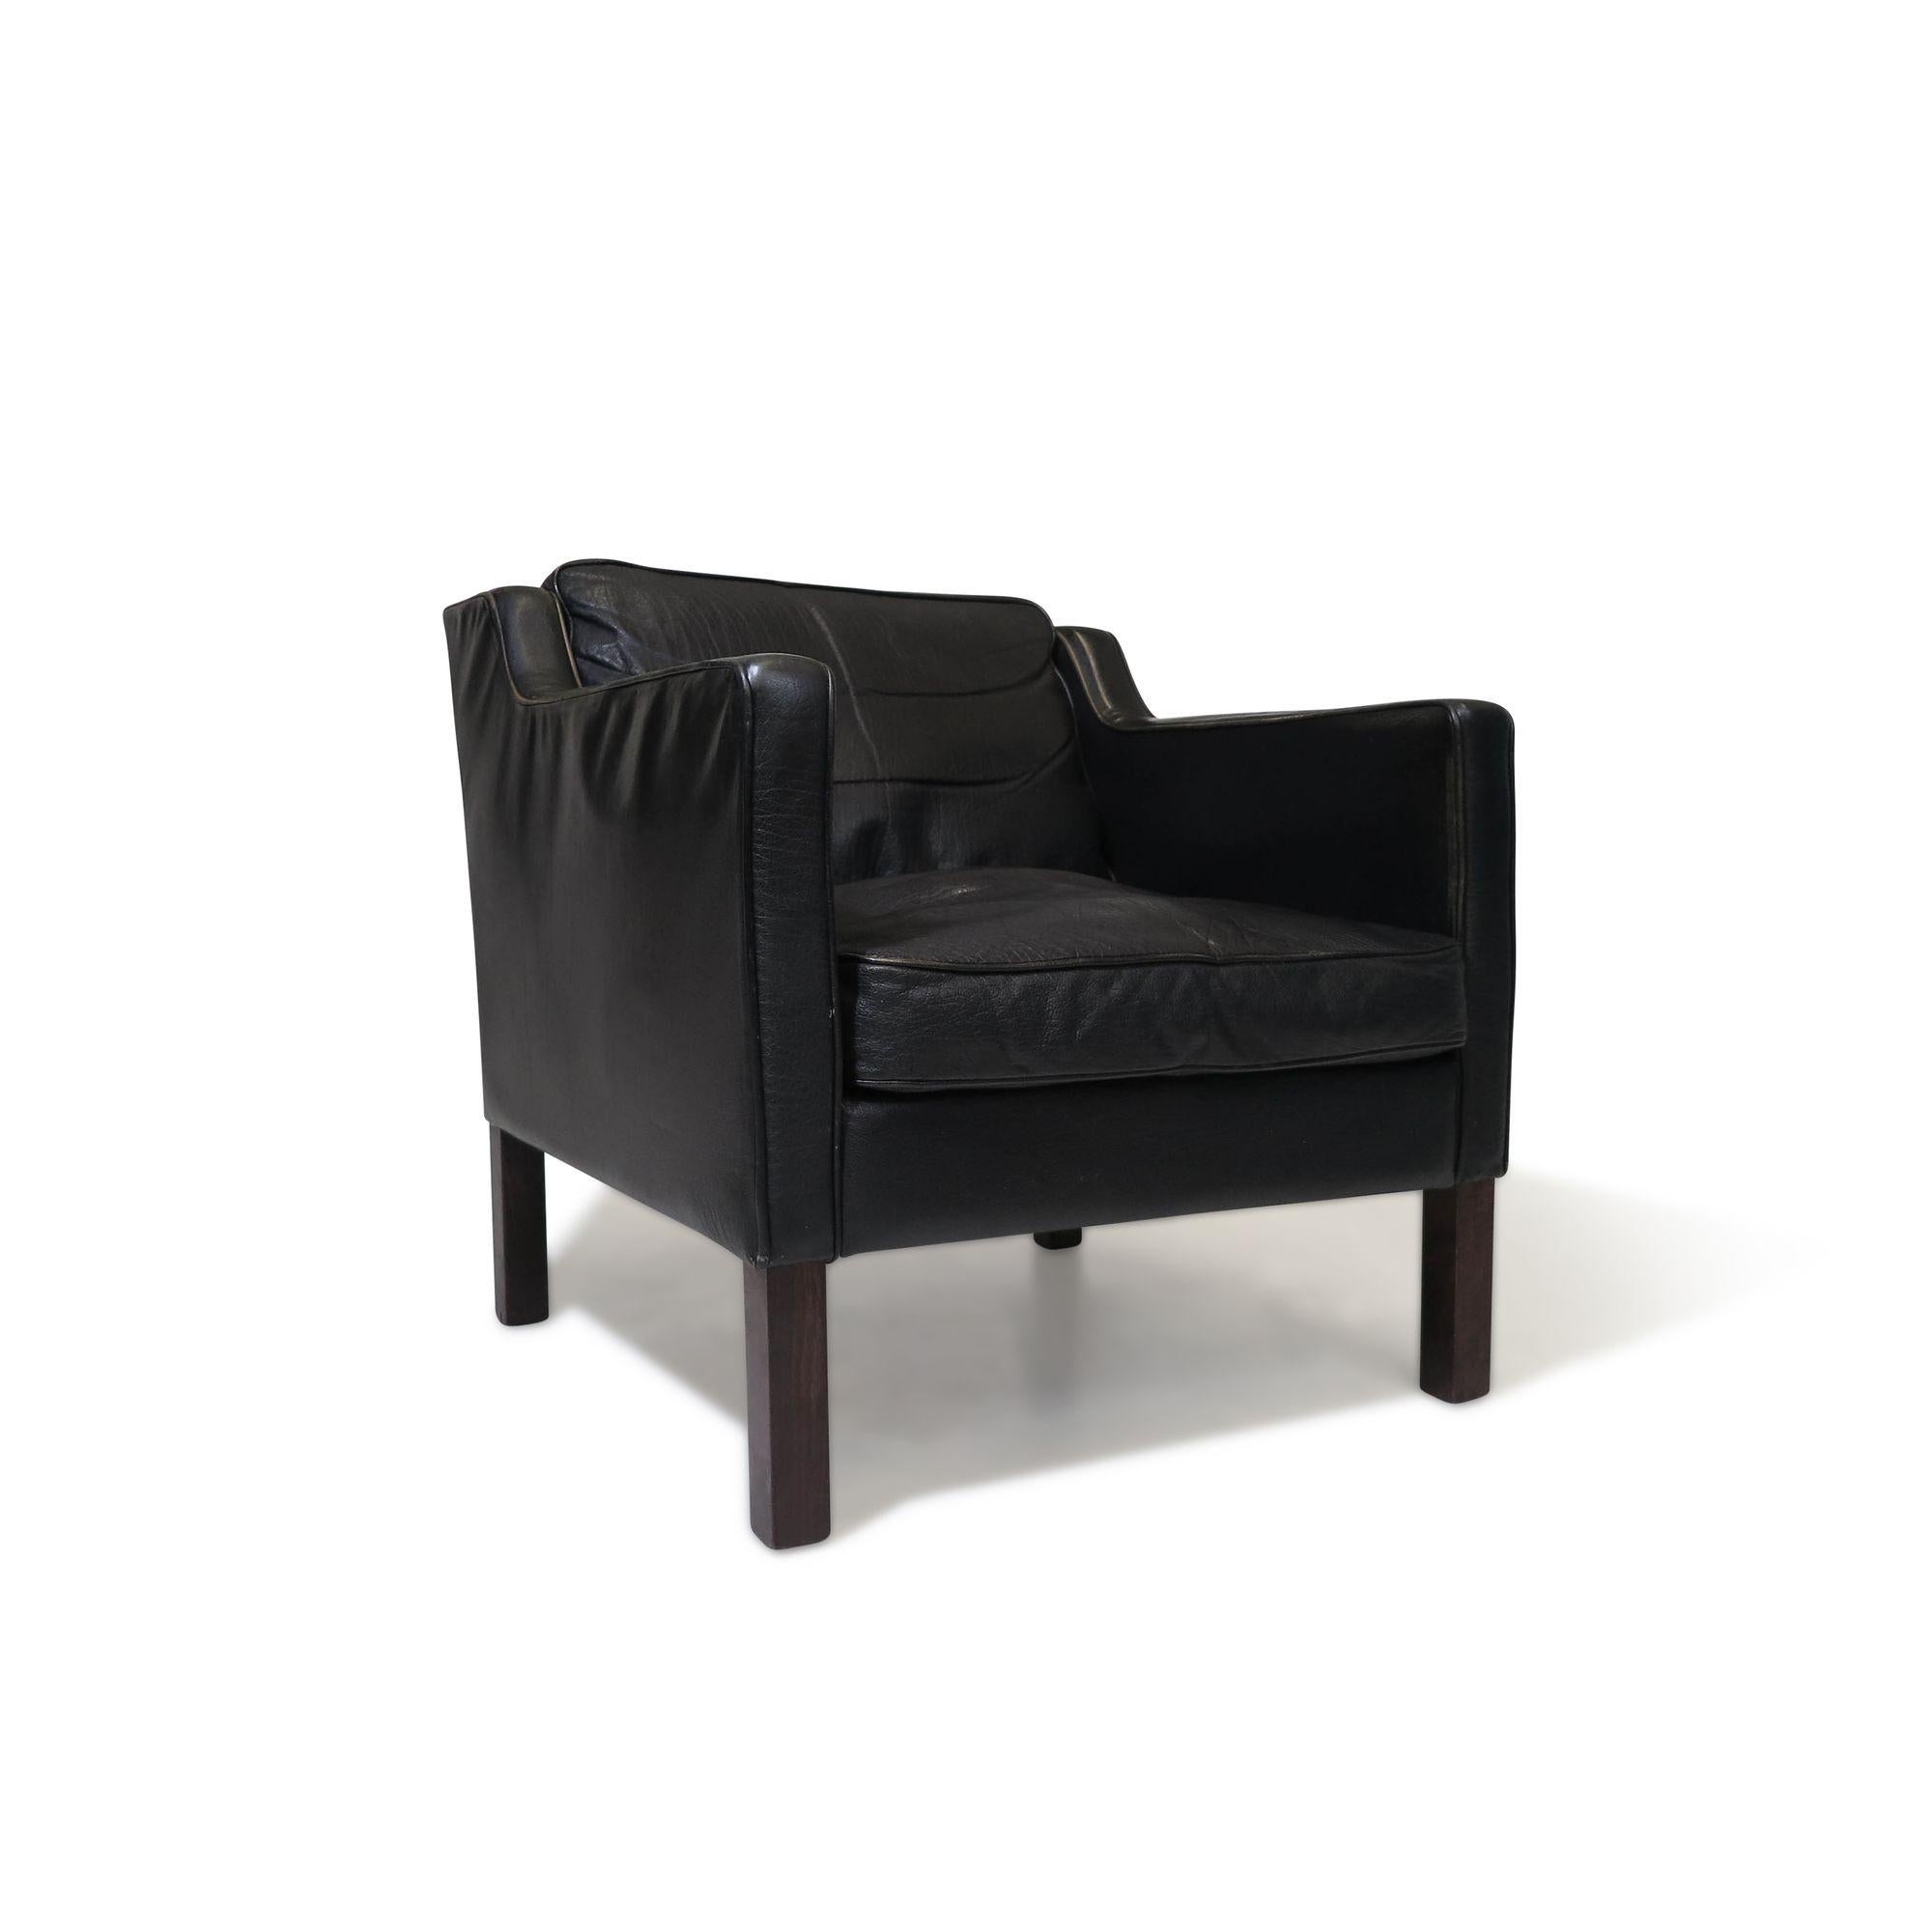 Scandinavian modern black leather lounge chair in manner of Borge Mogensen.
Classic form in it's original down filled leather cushions, raised on squared legs.
Measurements
W 28'' x D 28'' x H 28''
Seat Height 18''